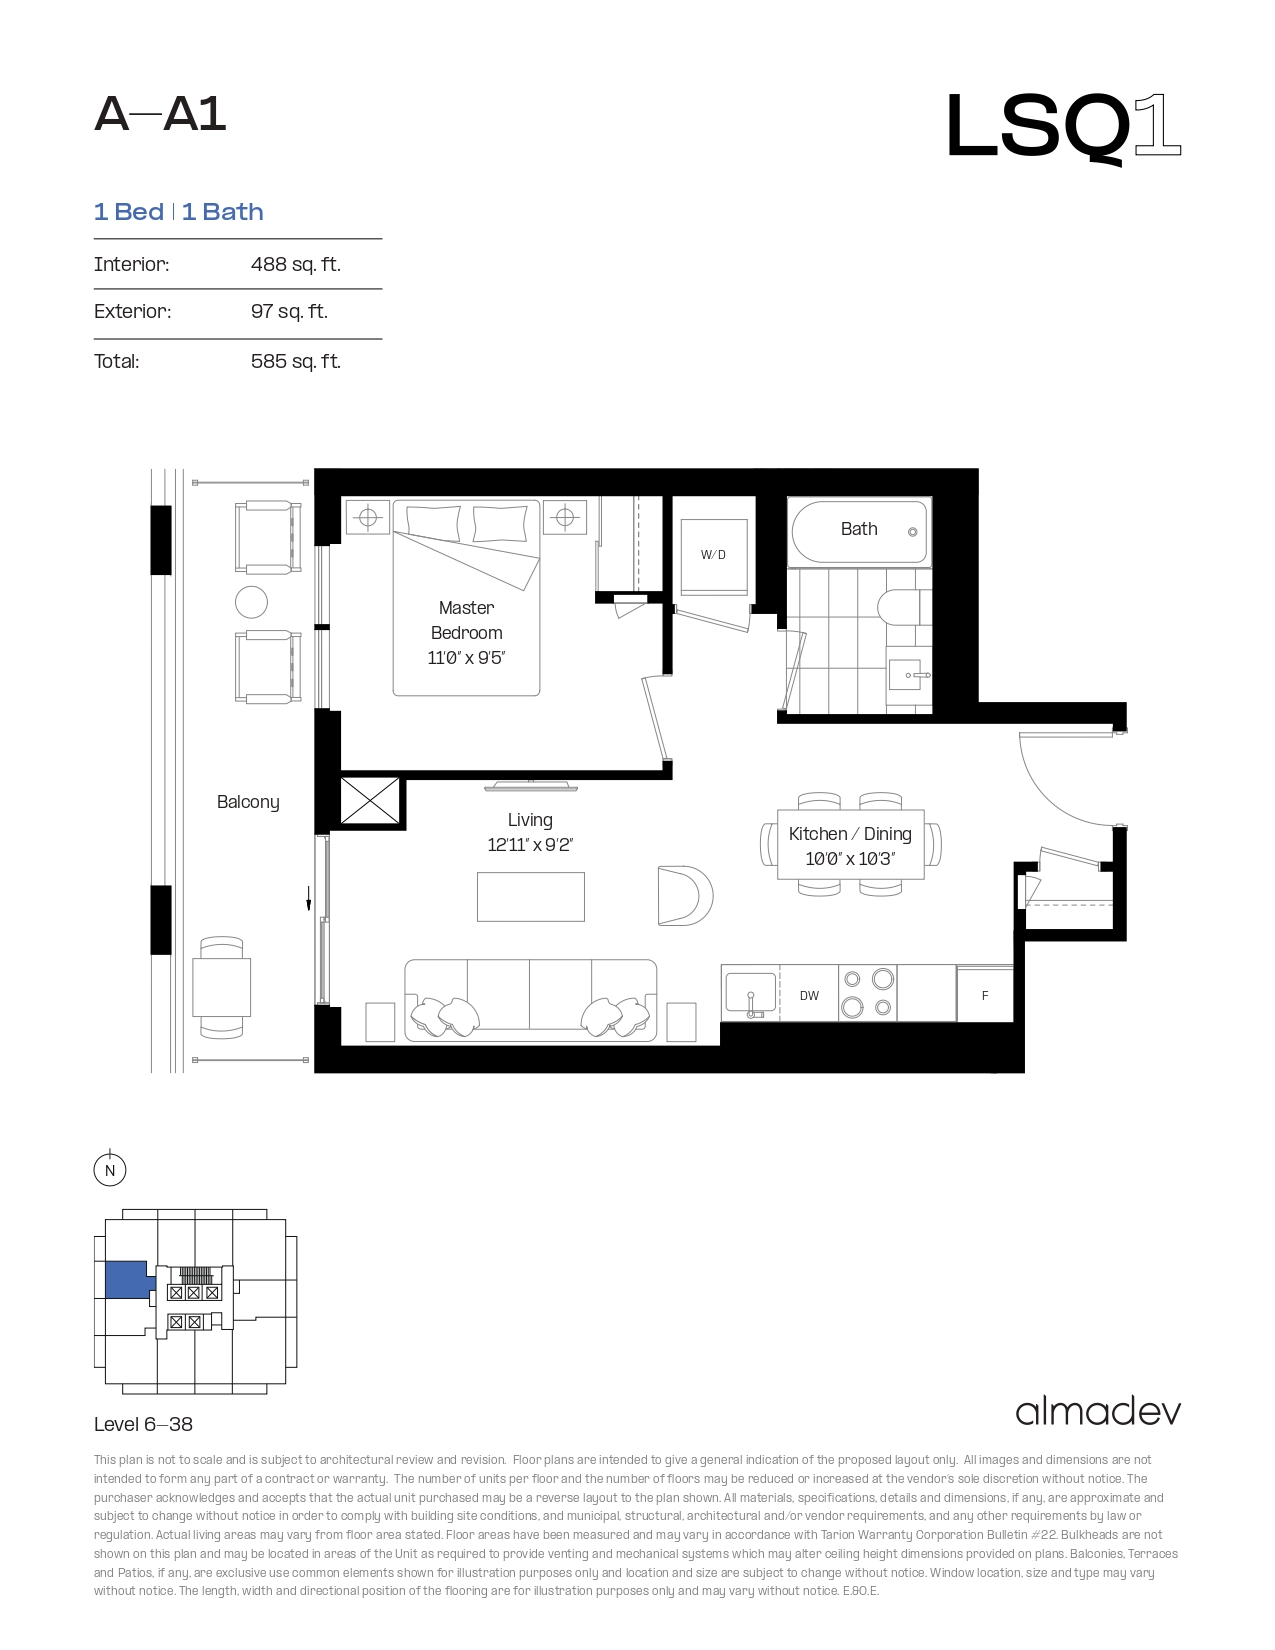 A-A1 Floor Plan of LSQ Condos with undefined beds